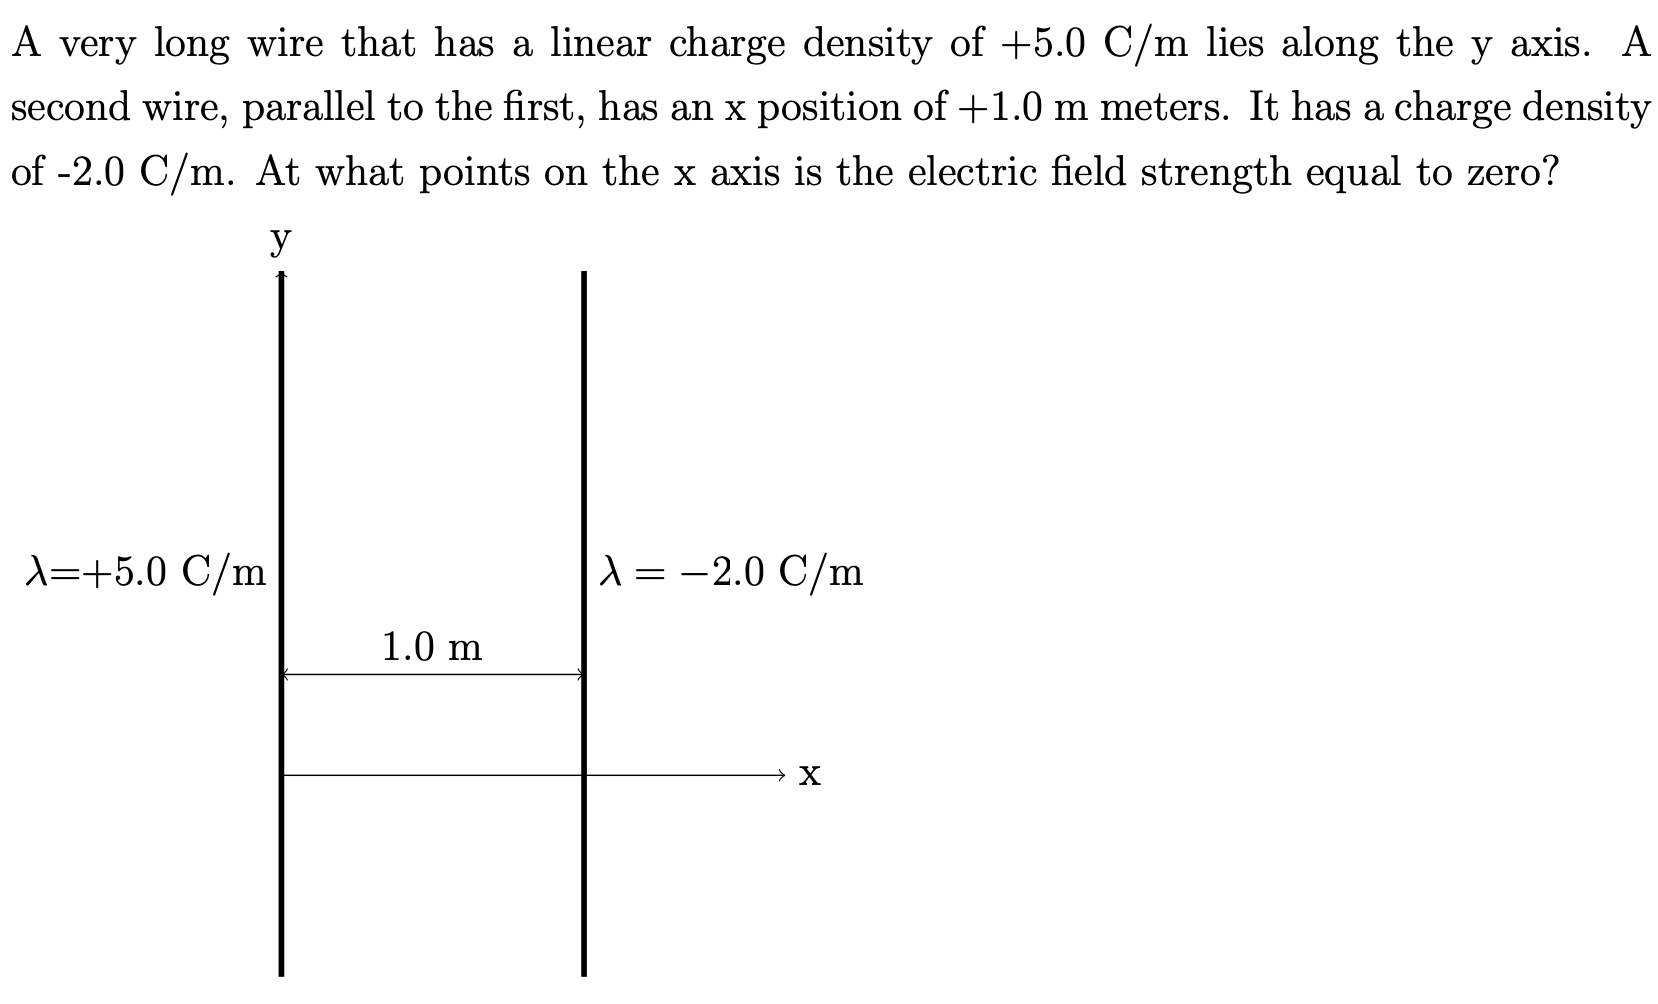 A very long wire that has a linear charge density of +5.0 C/m lies along the y axis. A second wire, parallel to the first, has an x position of +1.0 m meters. It has a charge density of −2.0 C/m. At what points on the x axis is the electric field strength equal to zero? 